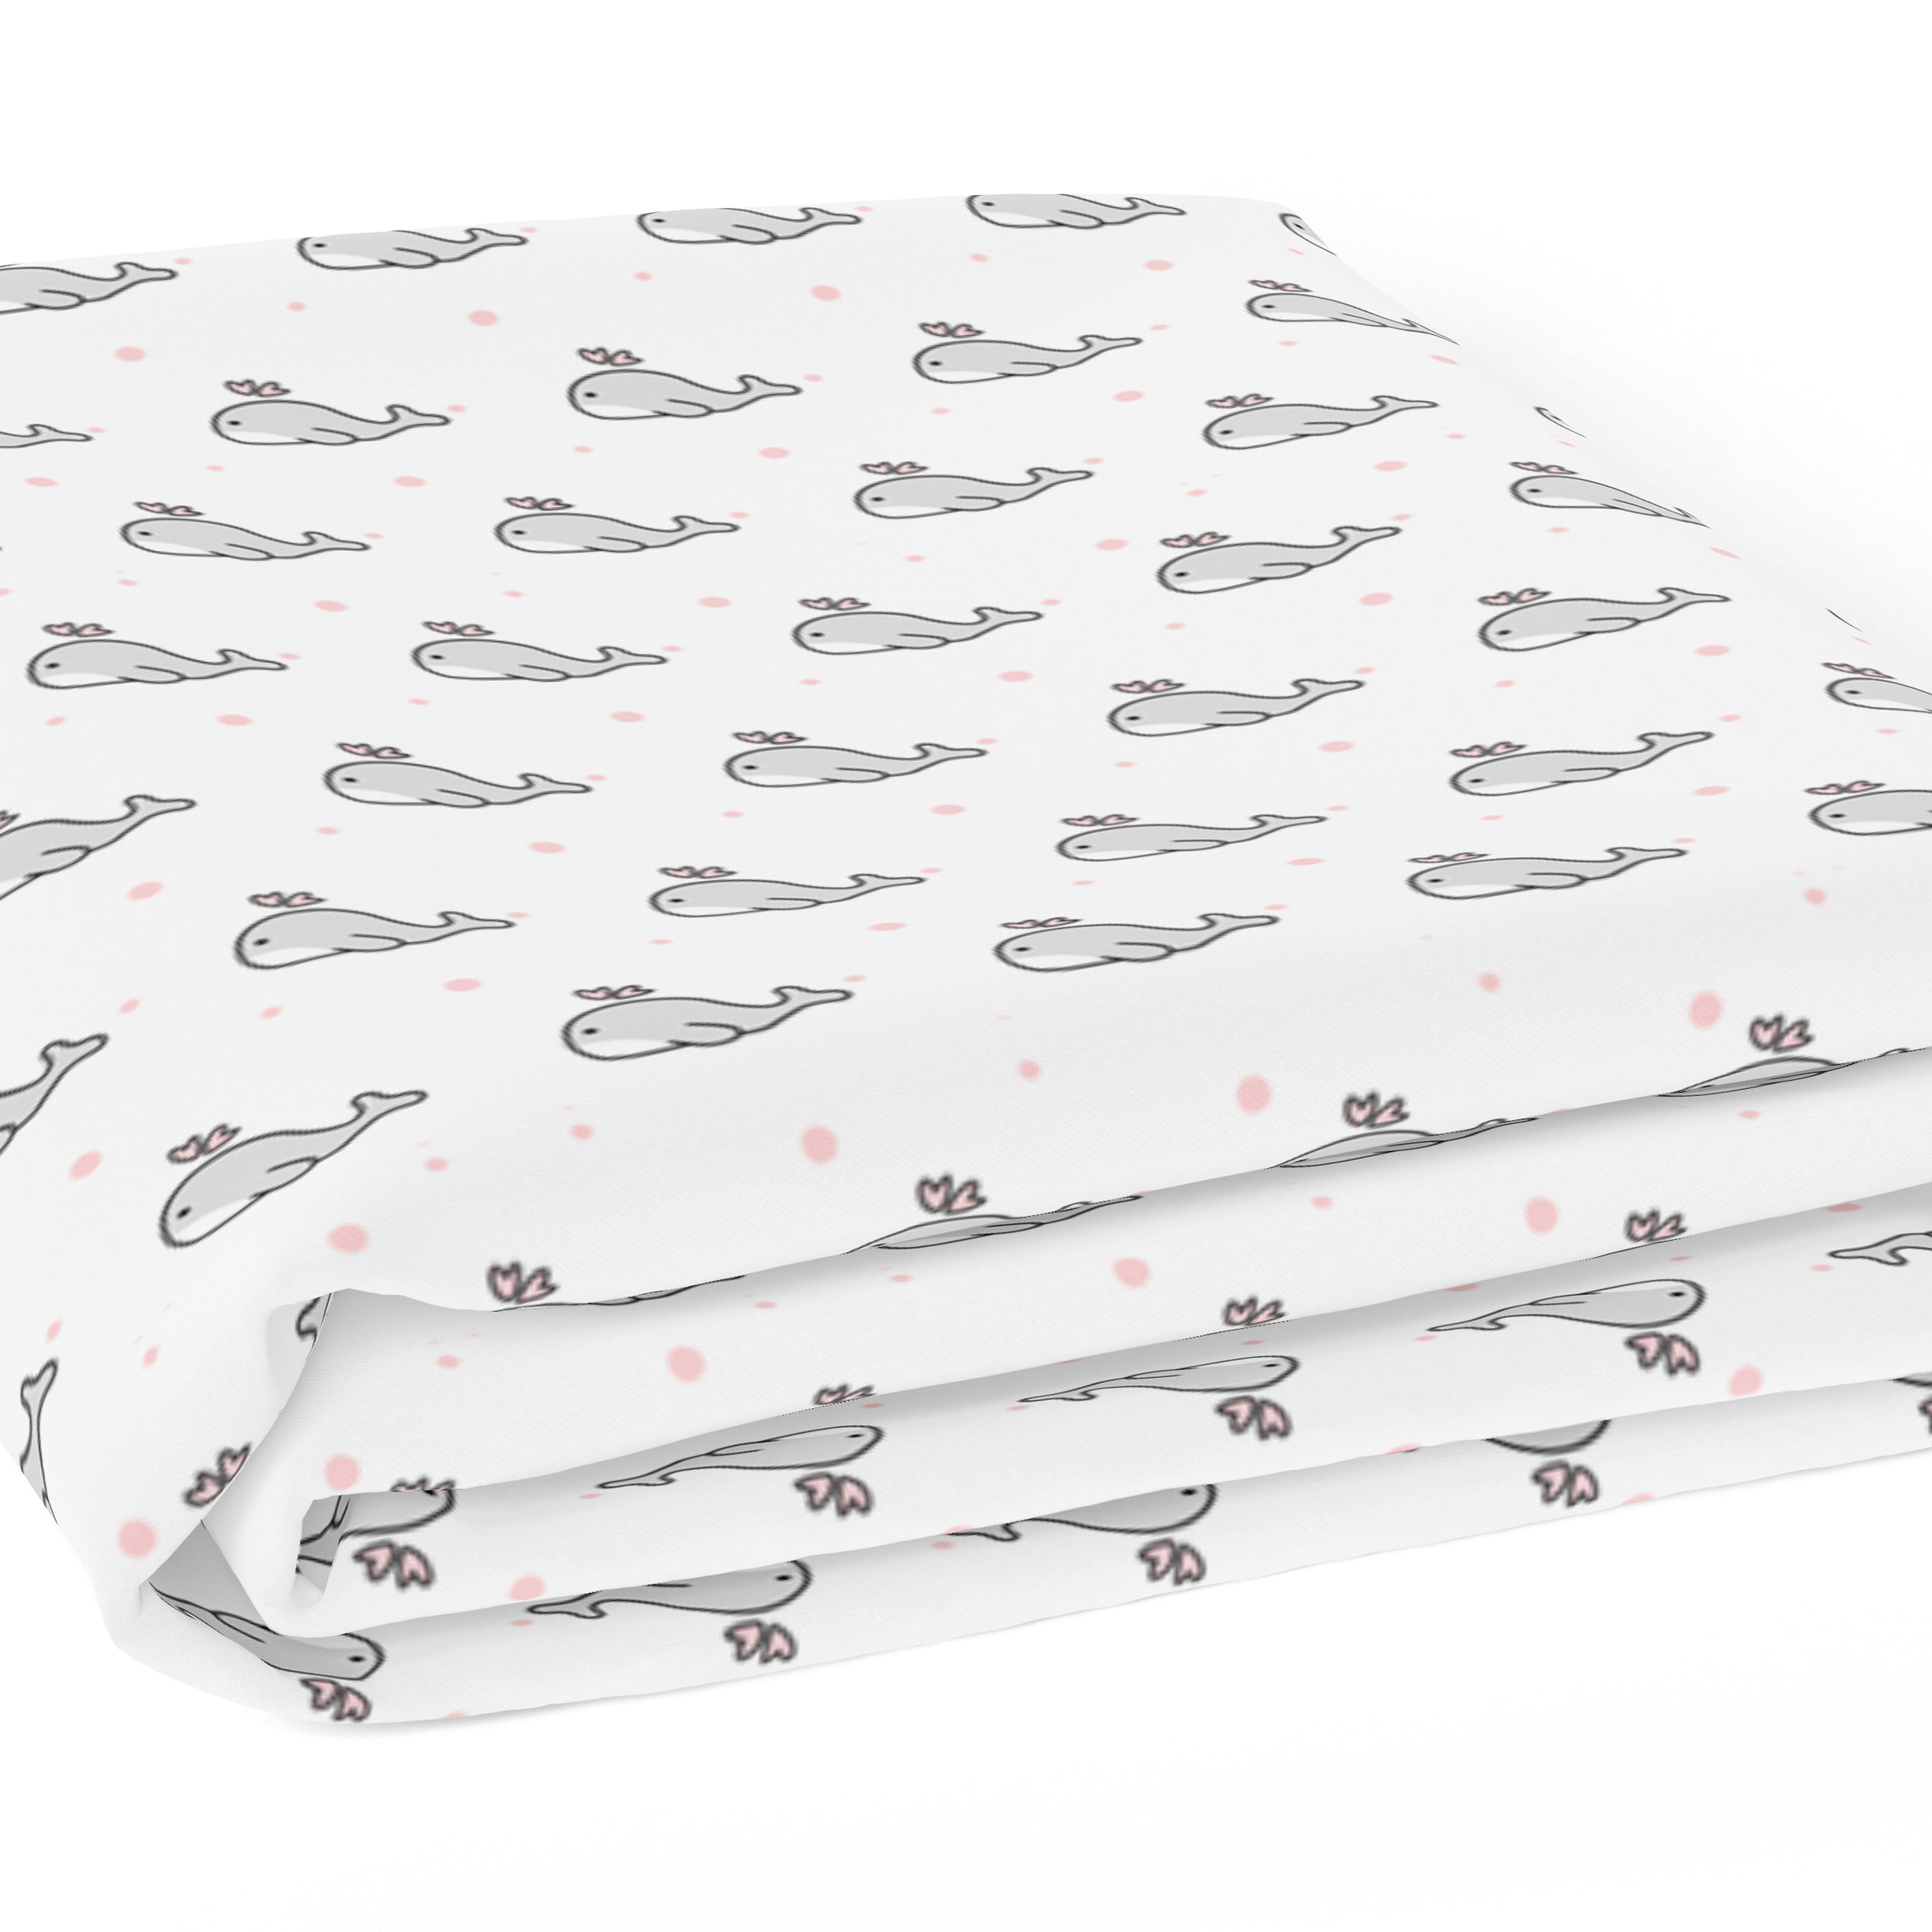 The White Cradle Pure Organic Cotton Fitted Cot Sheet for Baby Crib 24 x 48 inch - Grey Whale with Pink Dots (Medium)